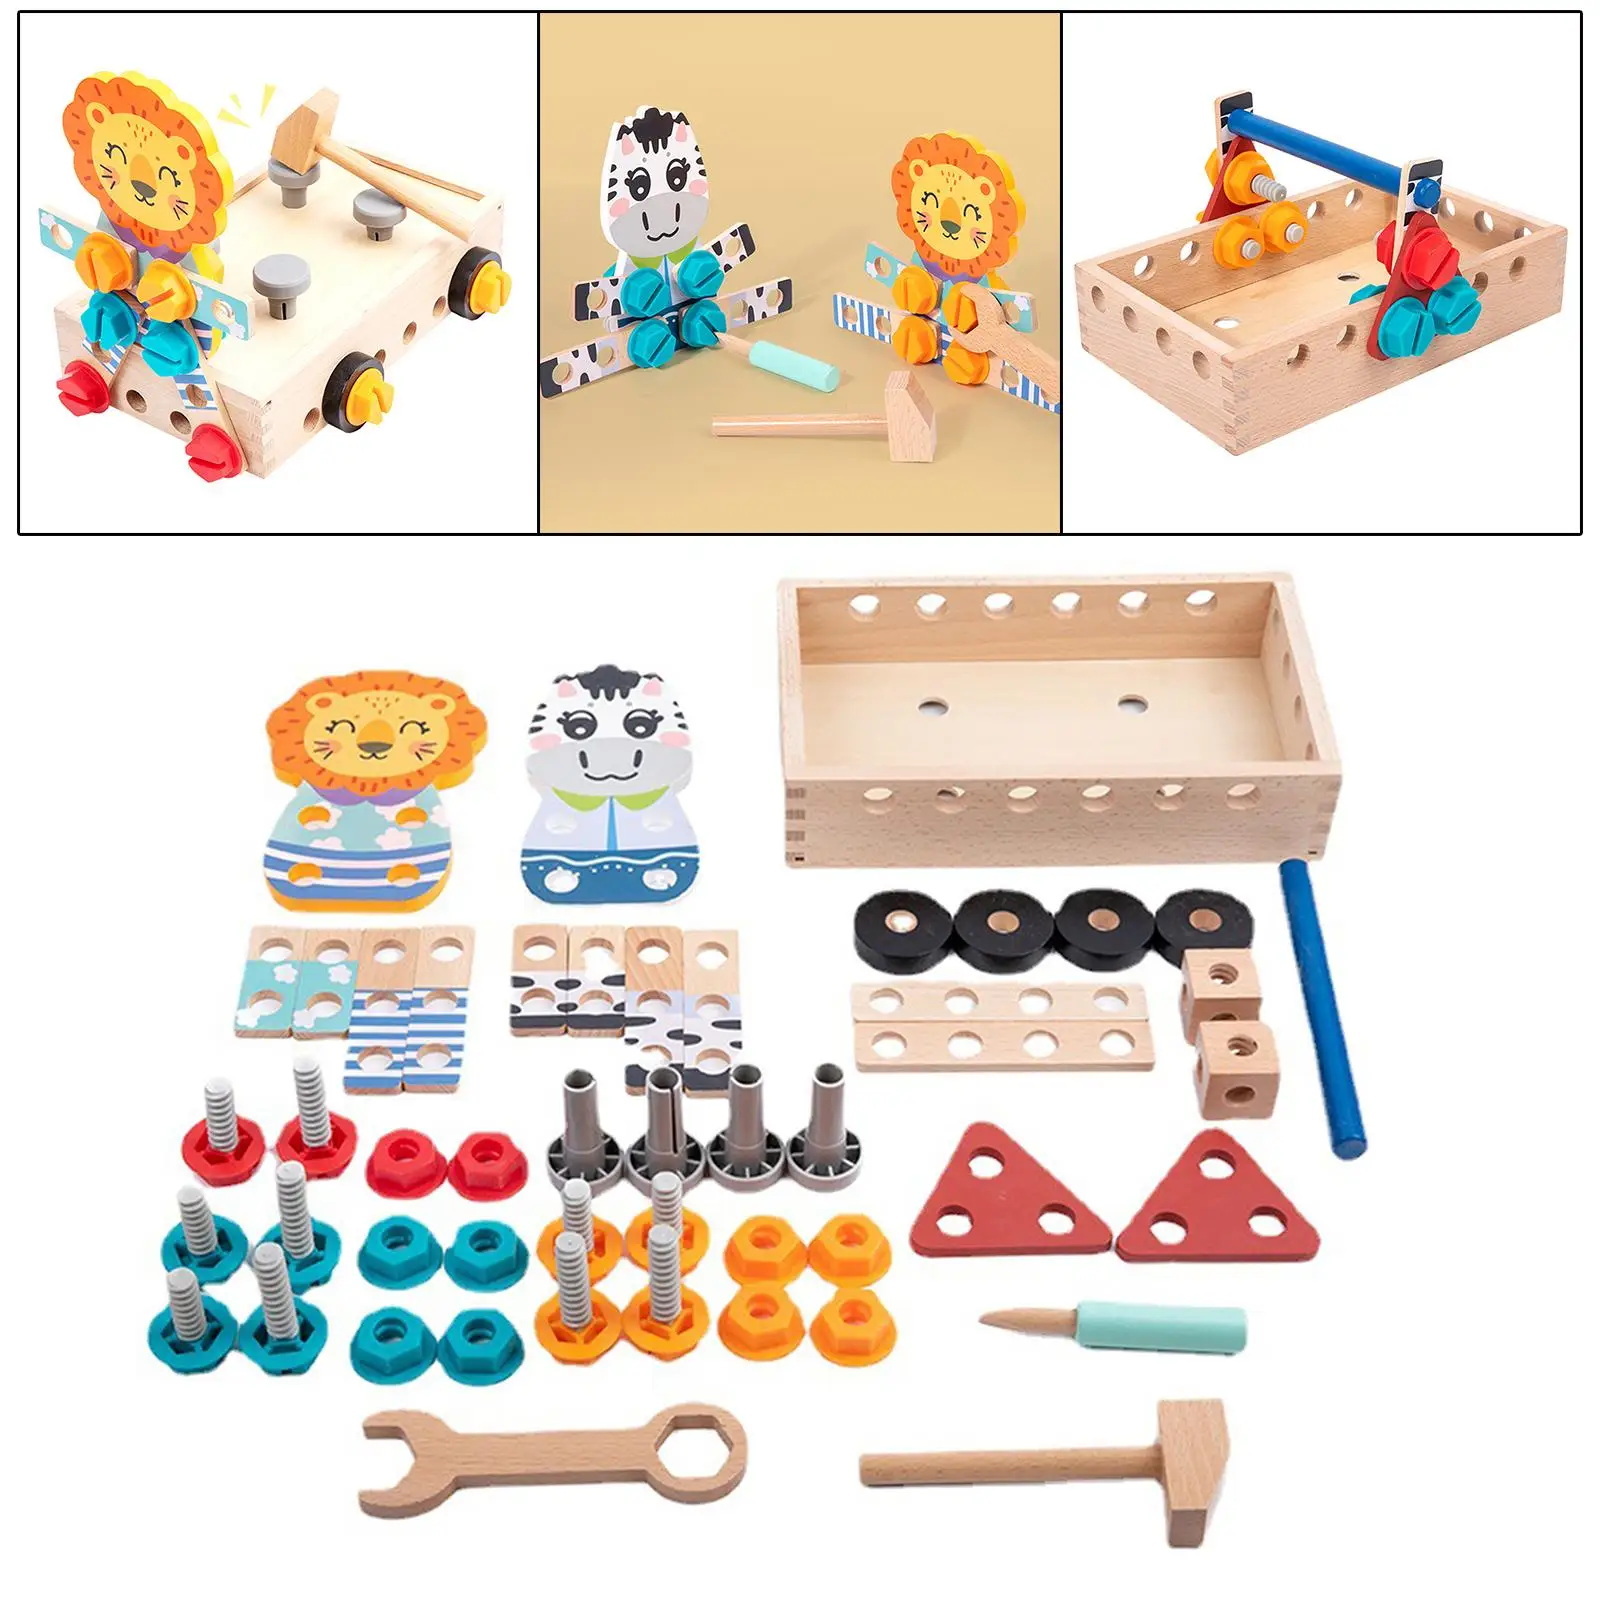 Kids Construction Toy Set Toddler Tool Set for Indoor Education Learning